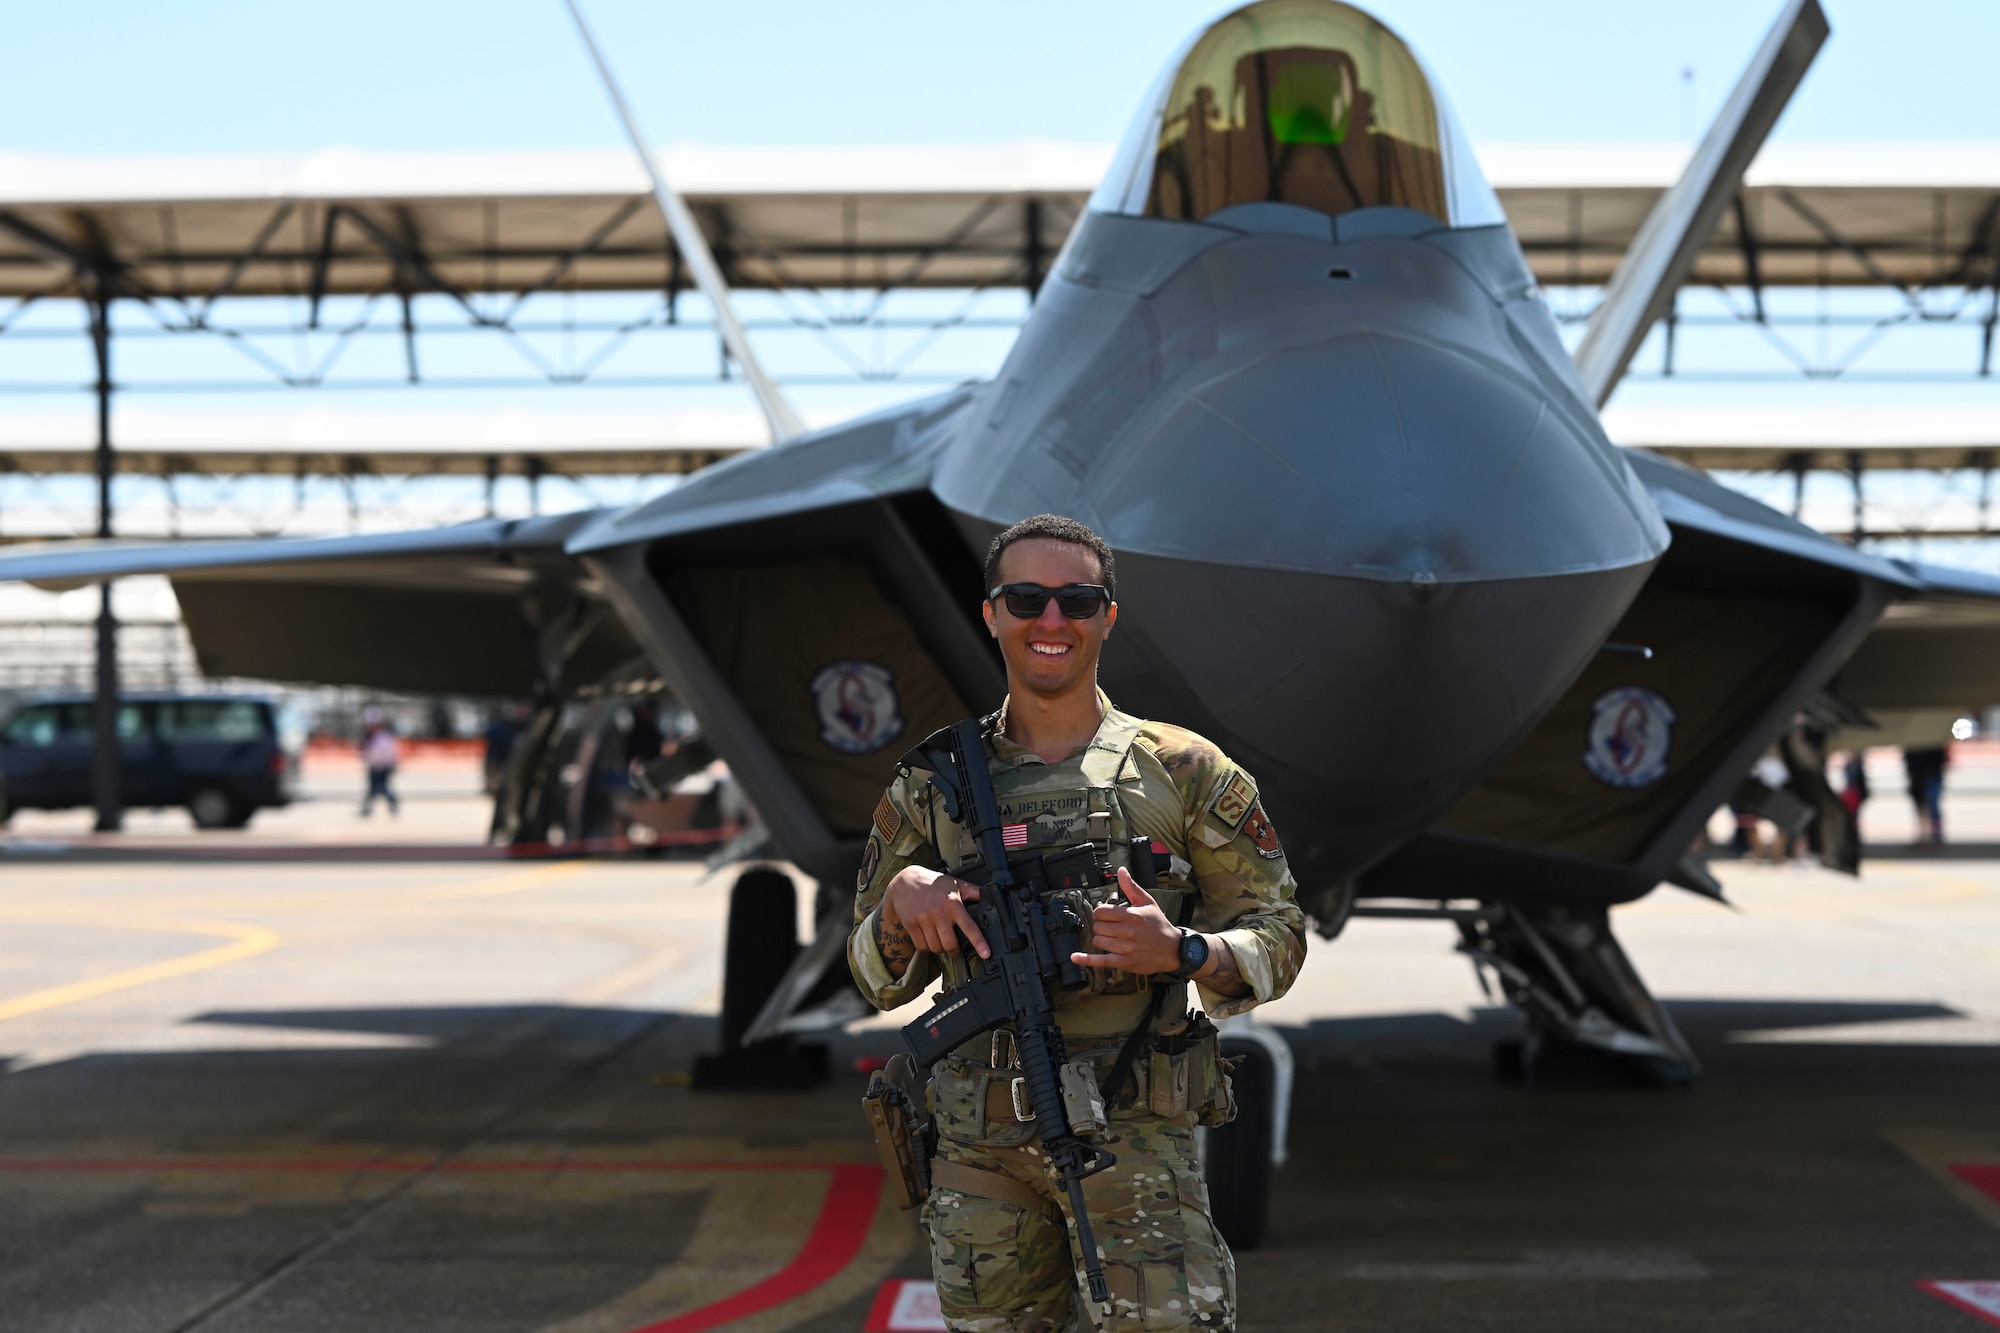 U.S. Air Force Senior Airman Tarriq Releford, 14th Security Forces Squadron, installation entry controller, stands guard in front of an F-22 Raptor, during the Wings over Columbus Air Show, Mar. 26, 2022, on Columbus Air Force Base, Miss. Releford was one of four Airmen who was selected to attend a 53-day Army Sniper School this past April. (U.S. Air Force photo by Airman 1st Class Jessica Haynie)